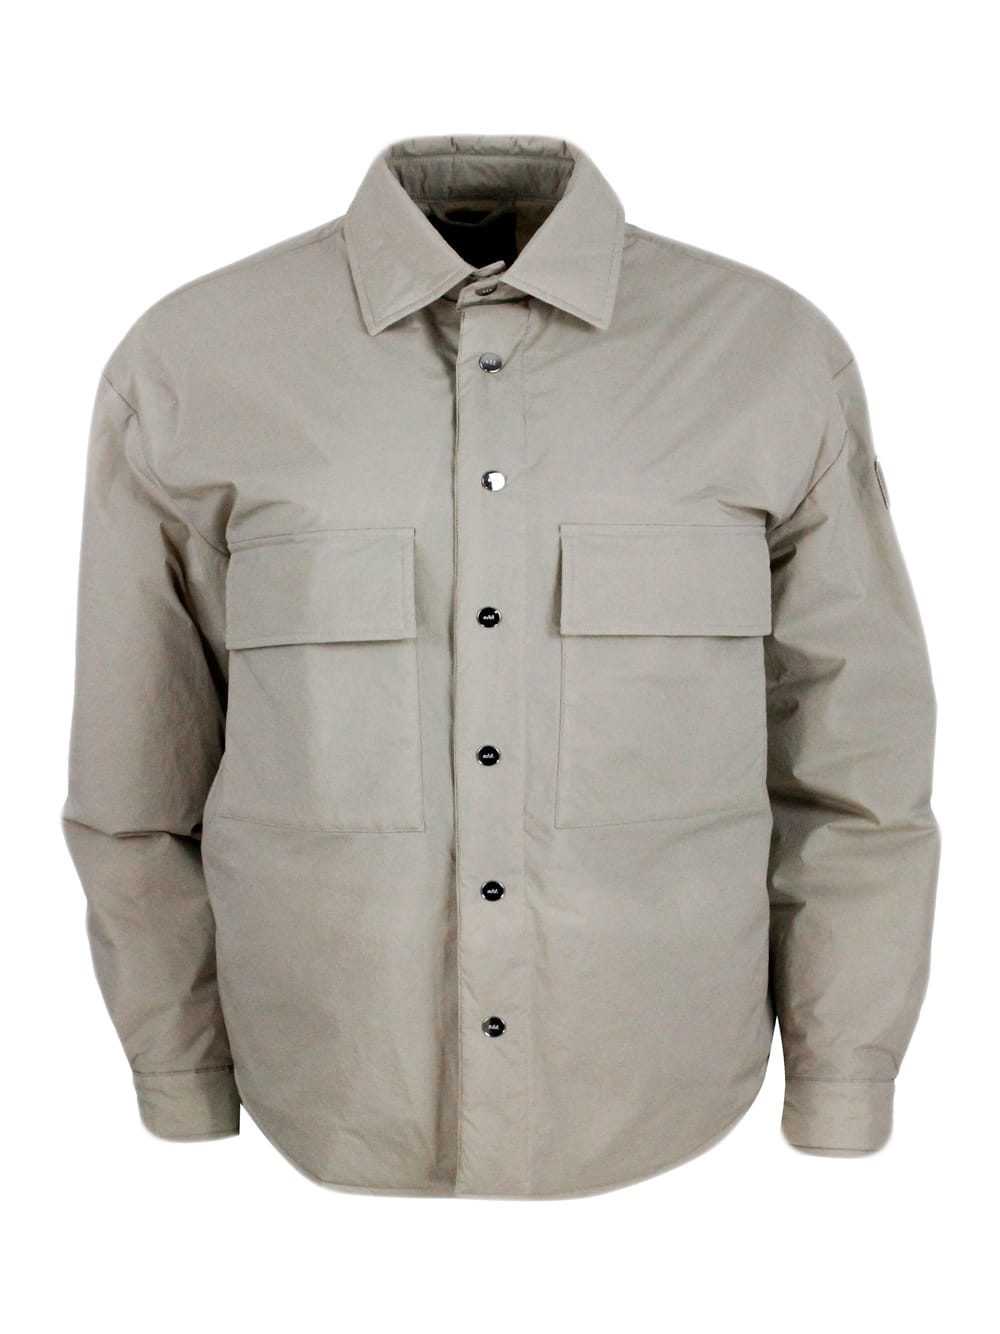 Lightly Padded Shirt Jacket In Recycled Material With Patch Pockets And Snap Button Closure